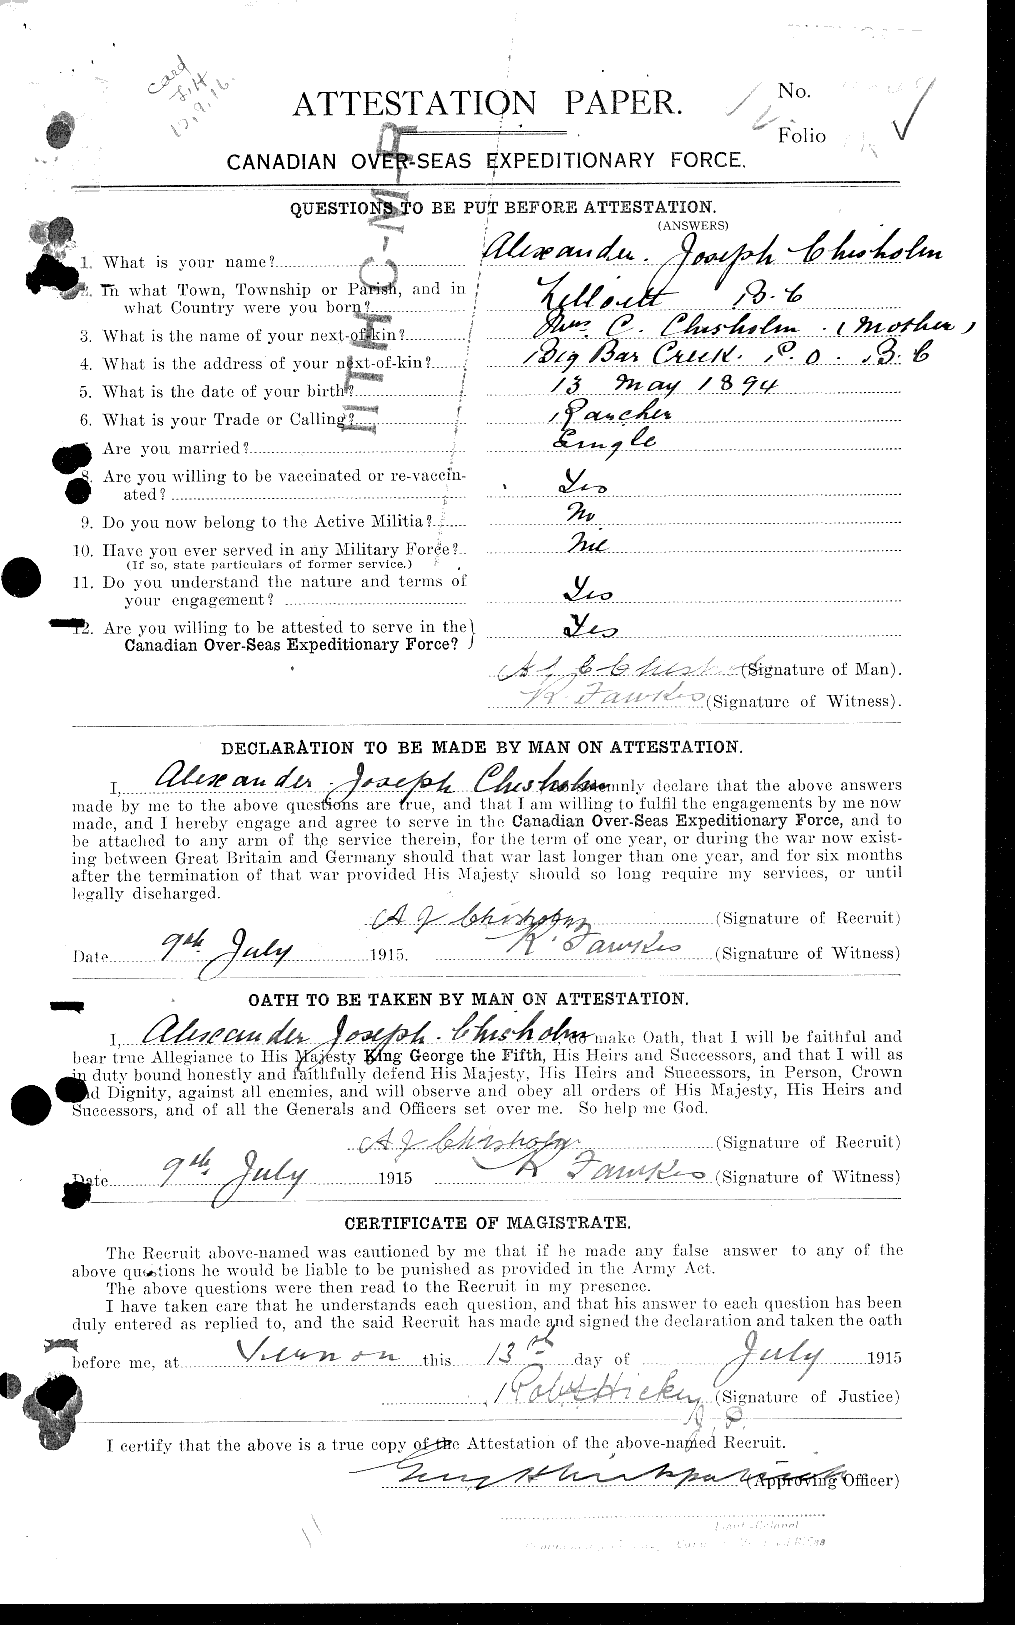 Personnel Records of the First World War - CEF 018201a